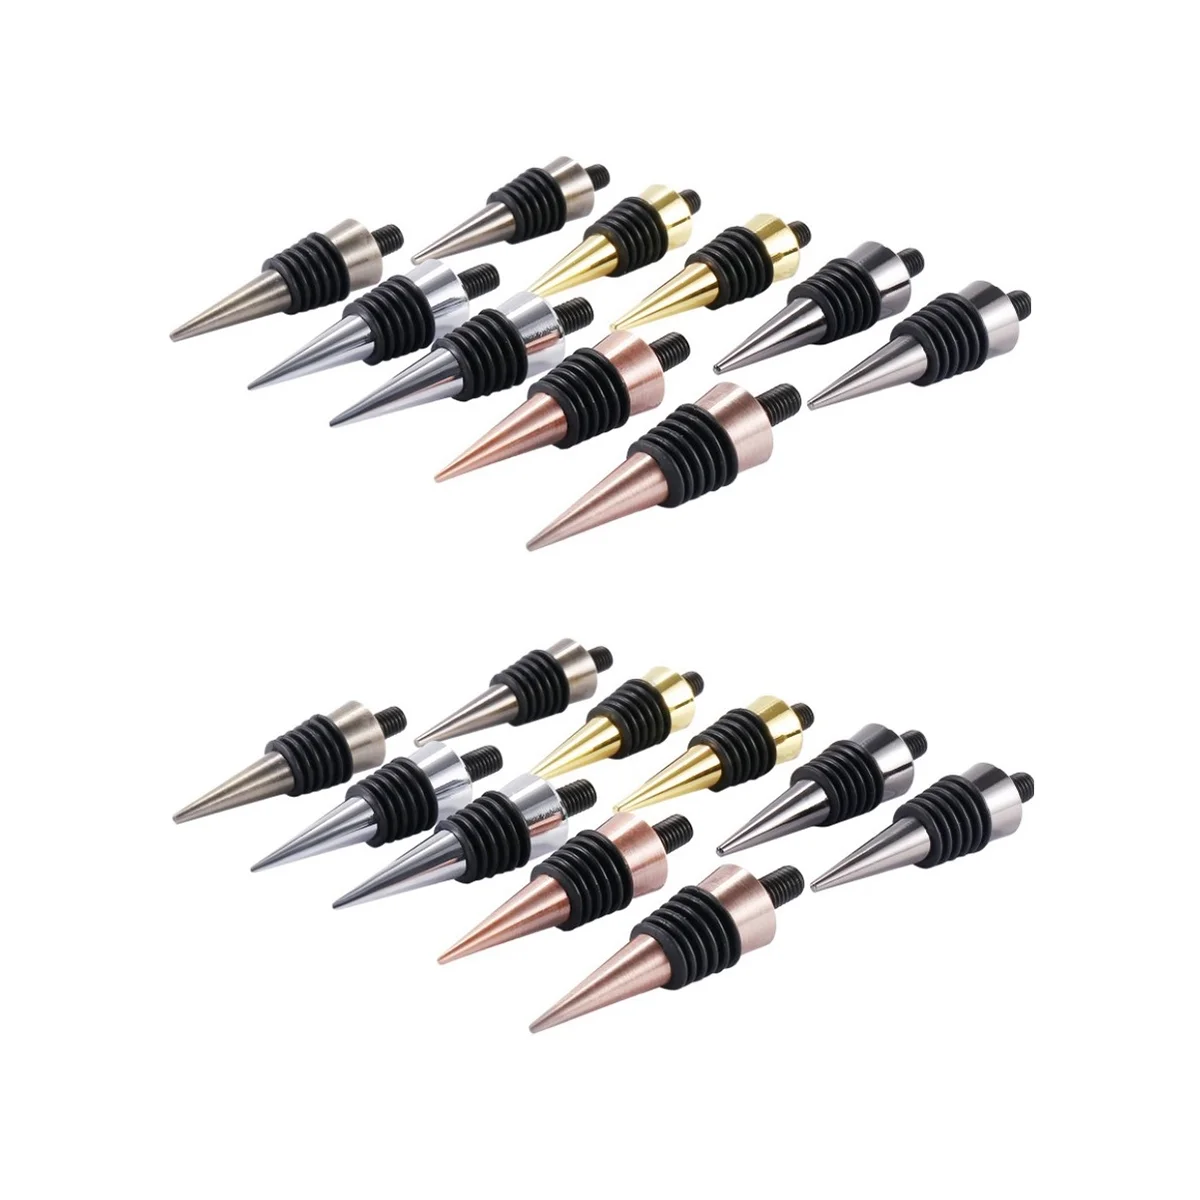 

20Pcs Blank Bottle Stopper With Threaded Post Metal Wine Stopper Inserts Set Hardware for Wood Turning DIY Project